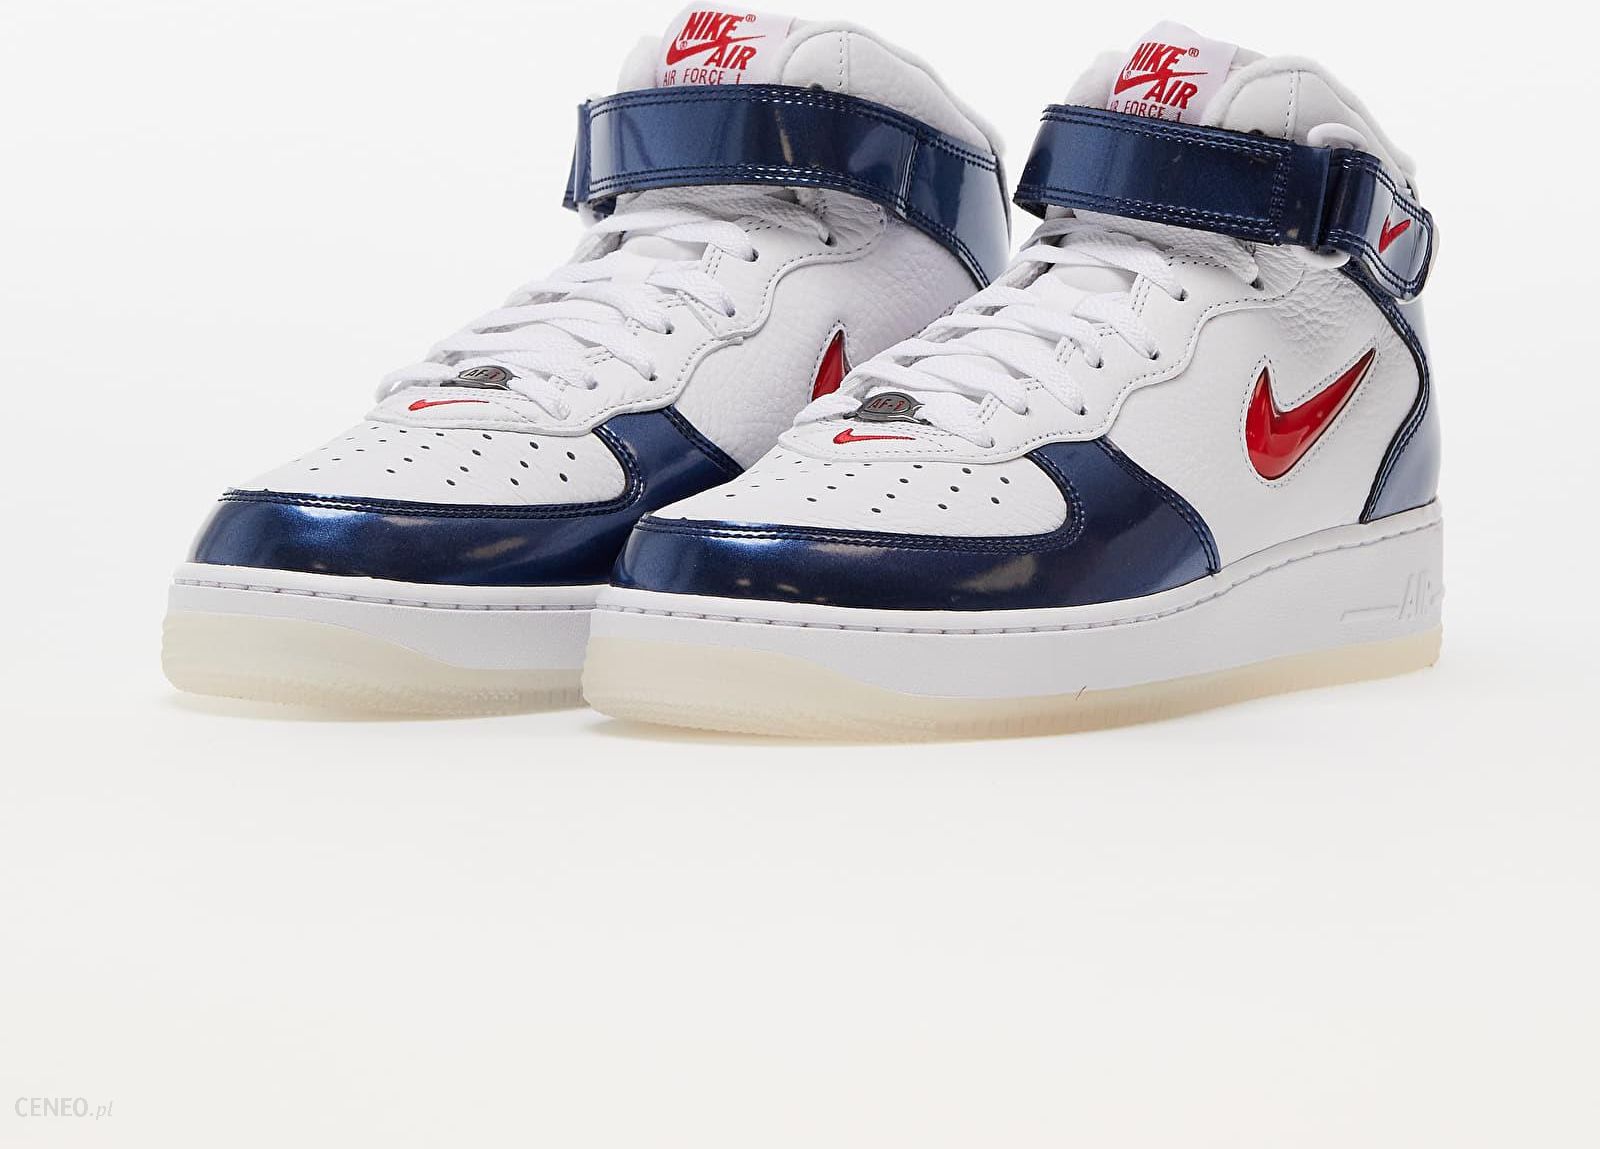 NIKE AIR FORCE 1 MID QS - WHITE/UNIVERSITY RED-MIDNIGHT NAVY-WHITE